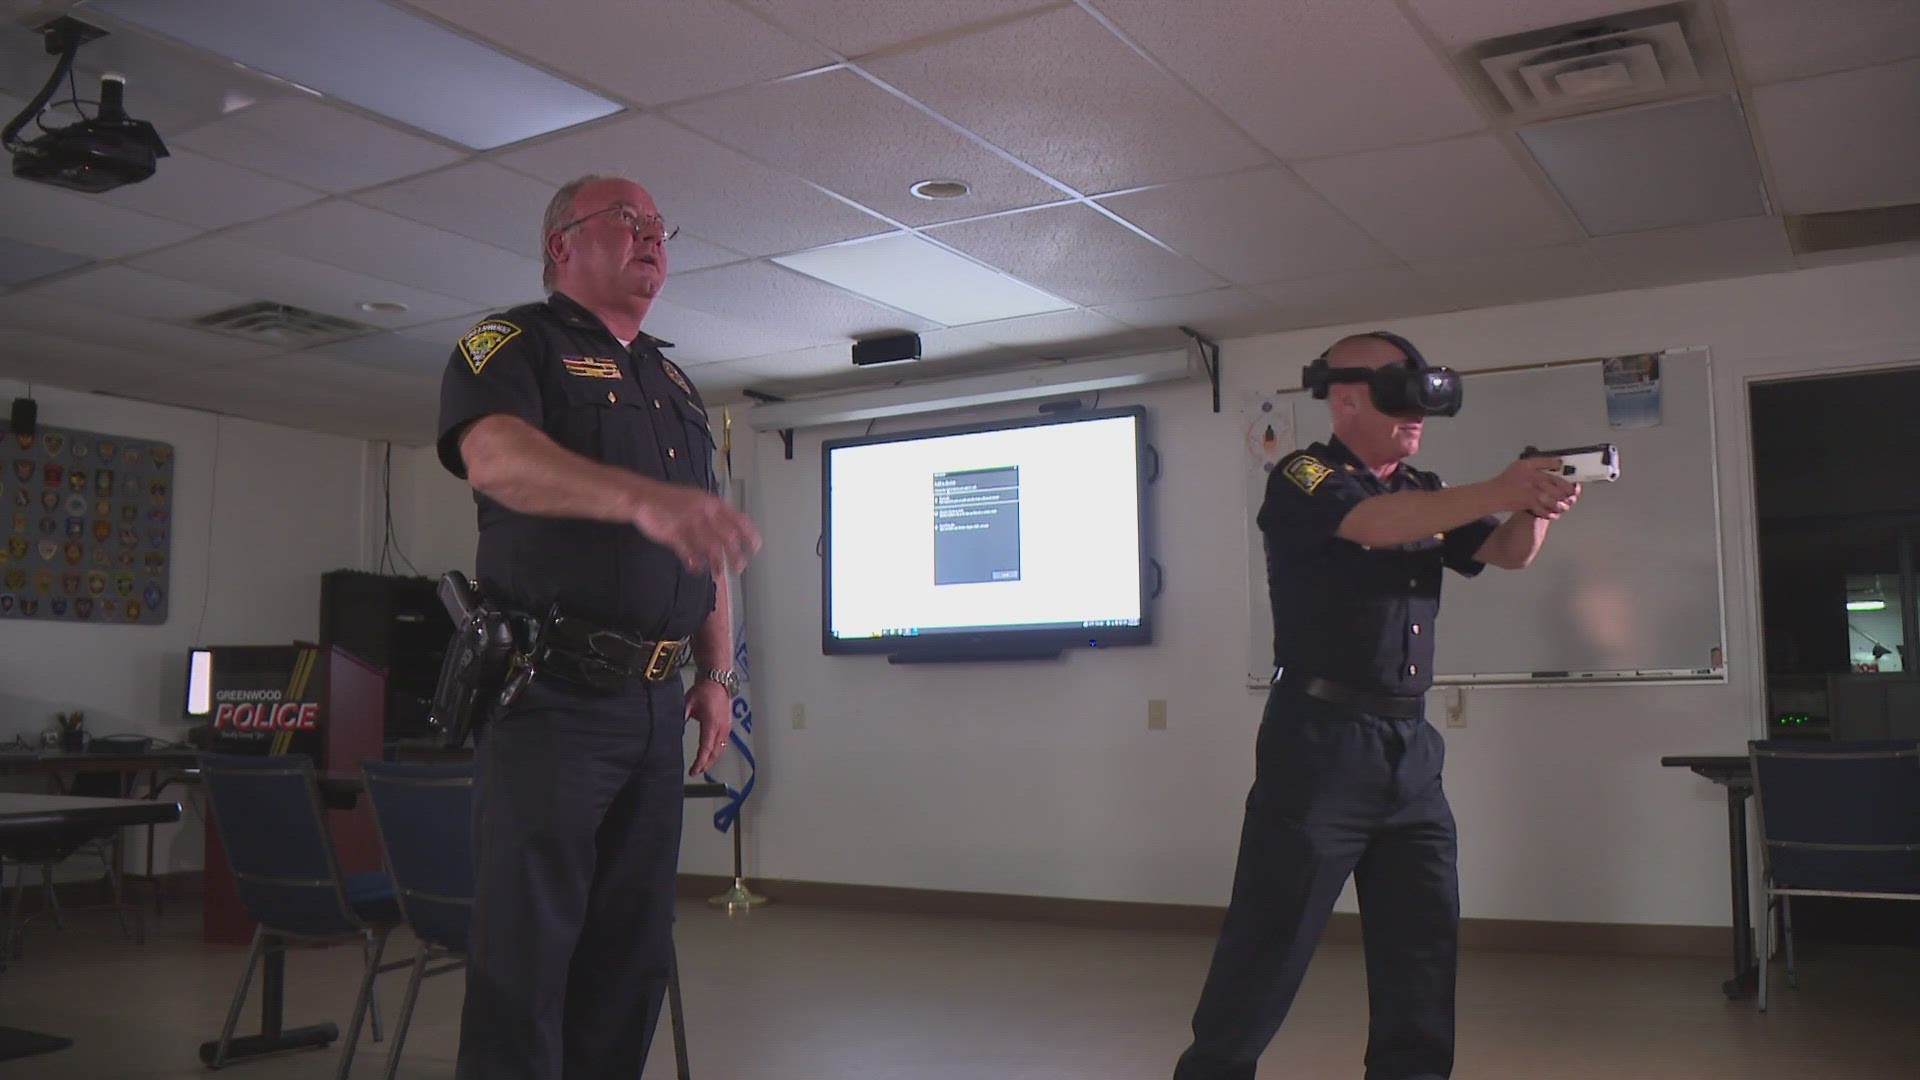 Greenwood police just bought four virtual reality headsets; the goal is to get immersive scenario based training that's as close to reality as possible.